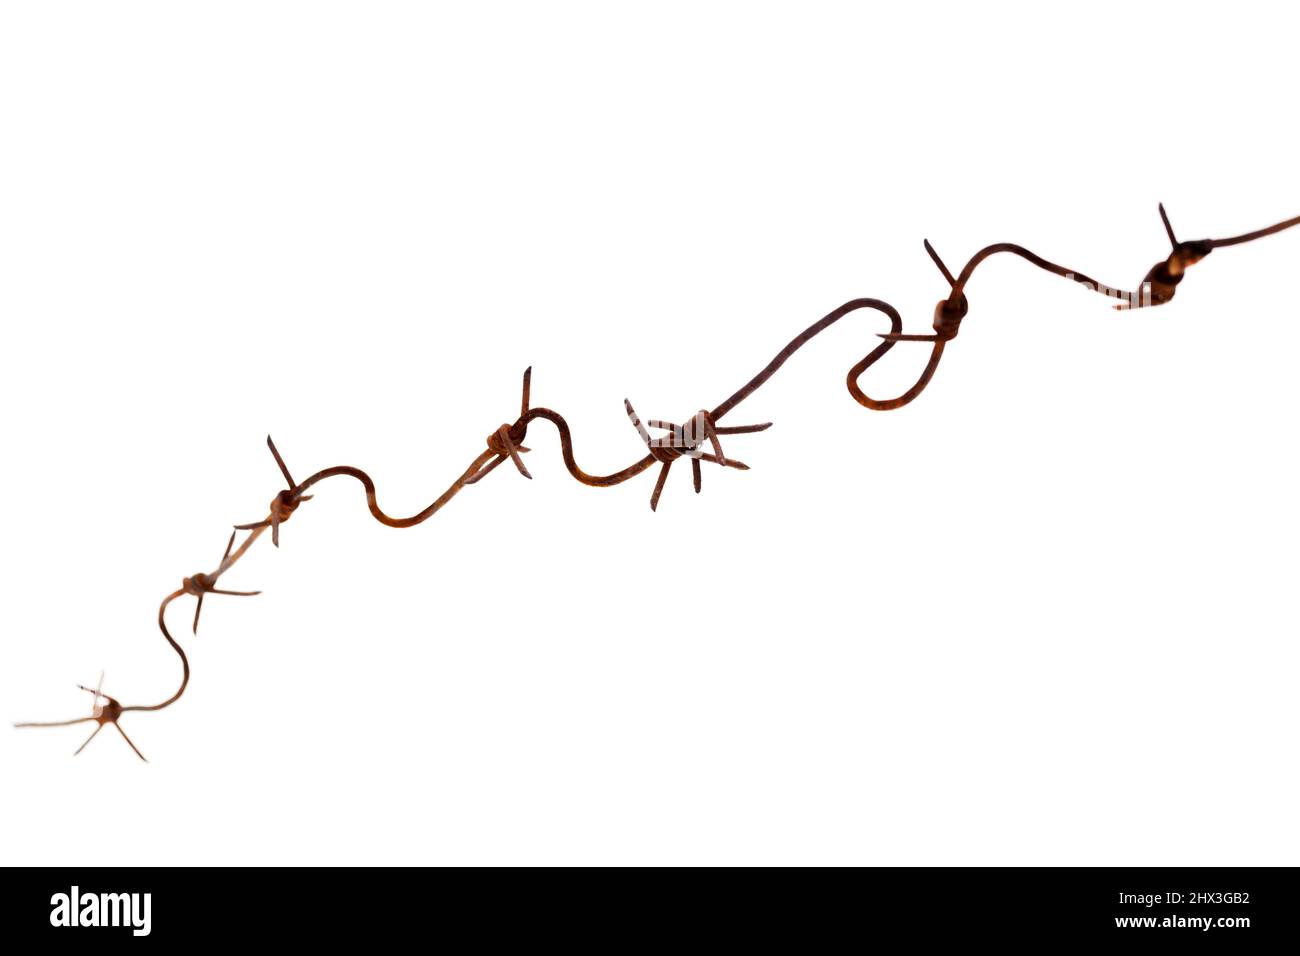 Rusty barbed wire isolated on white background, abstract photo Stock Photo